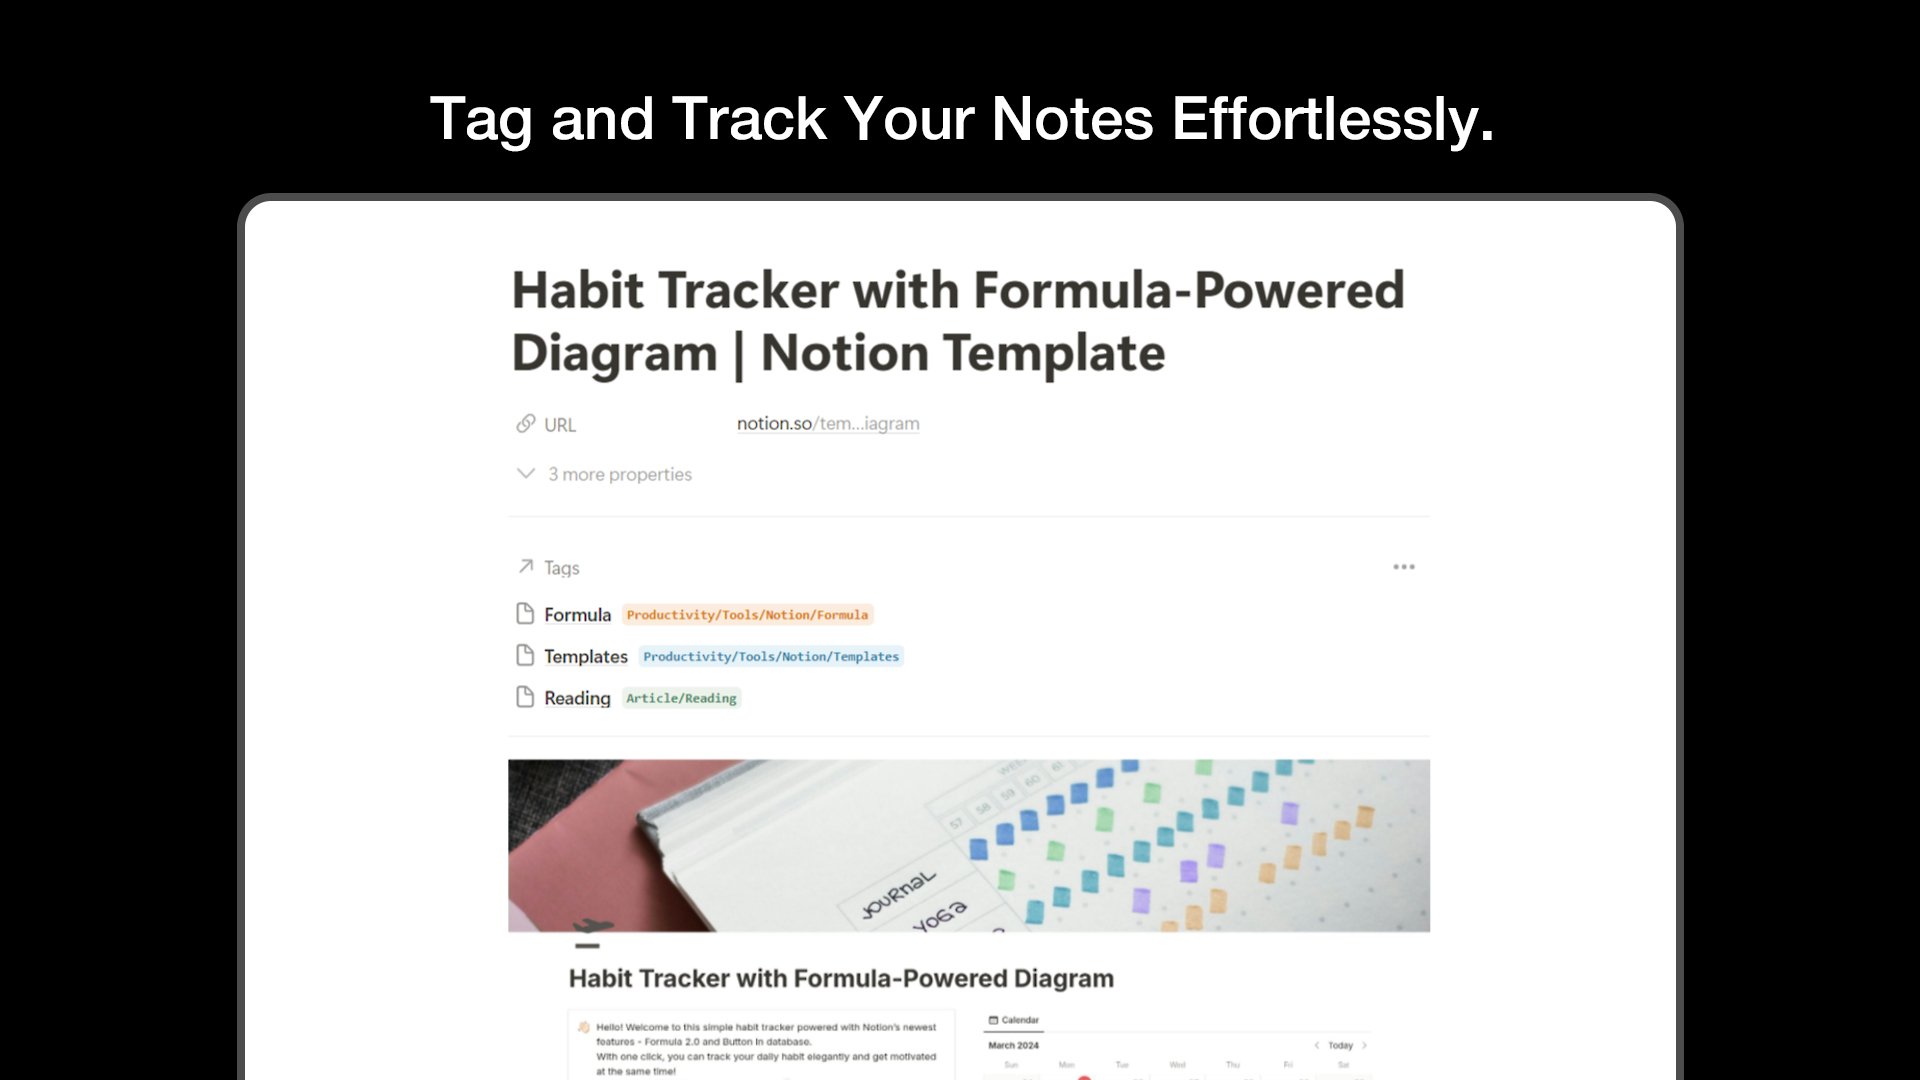 An intuitive template using nested tags to help organize your knowledge and projects in Notion.